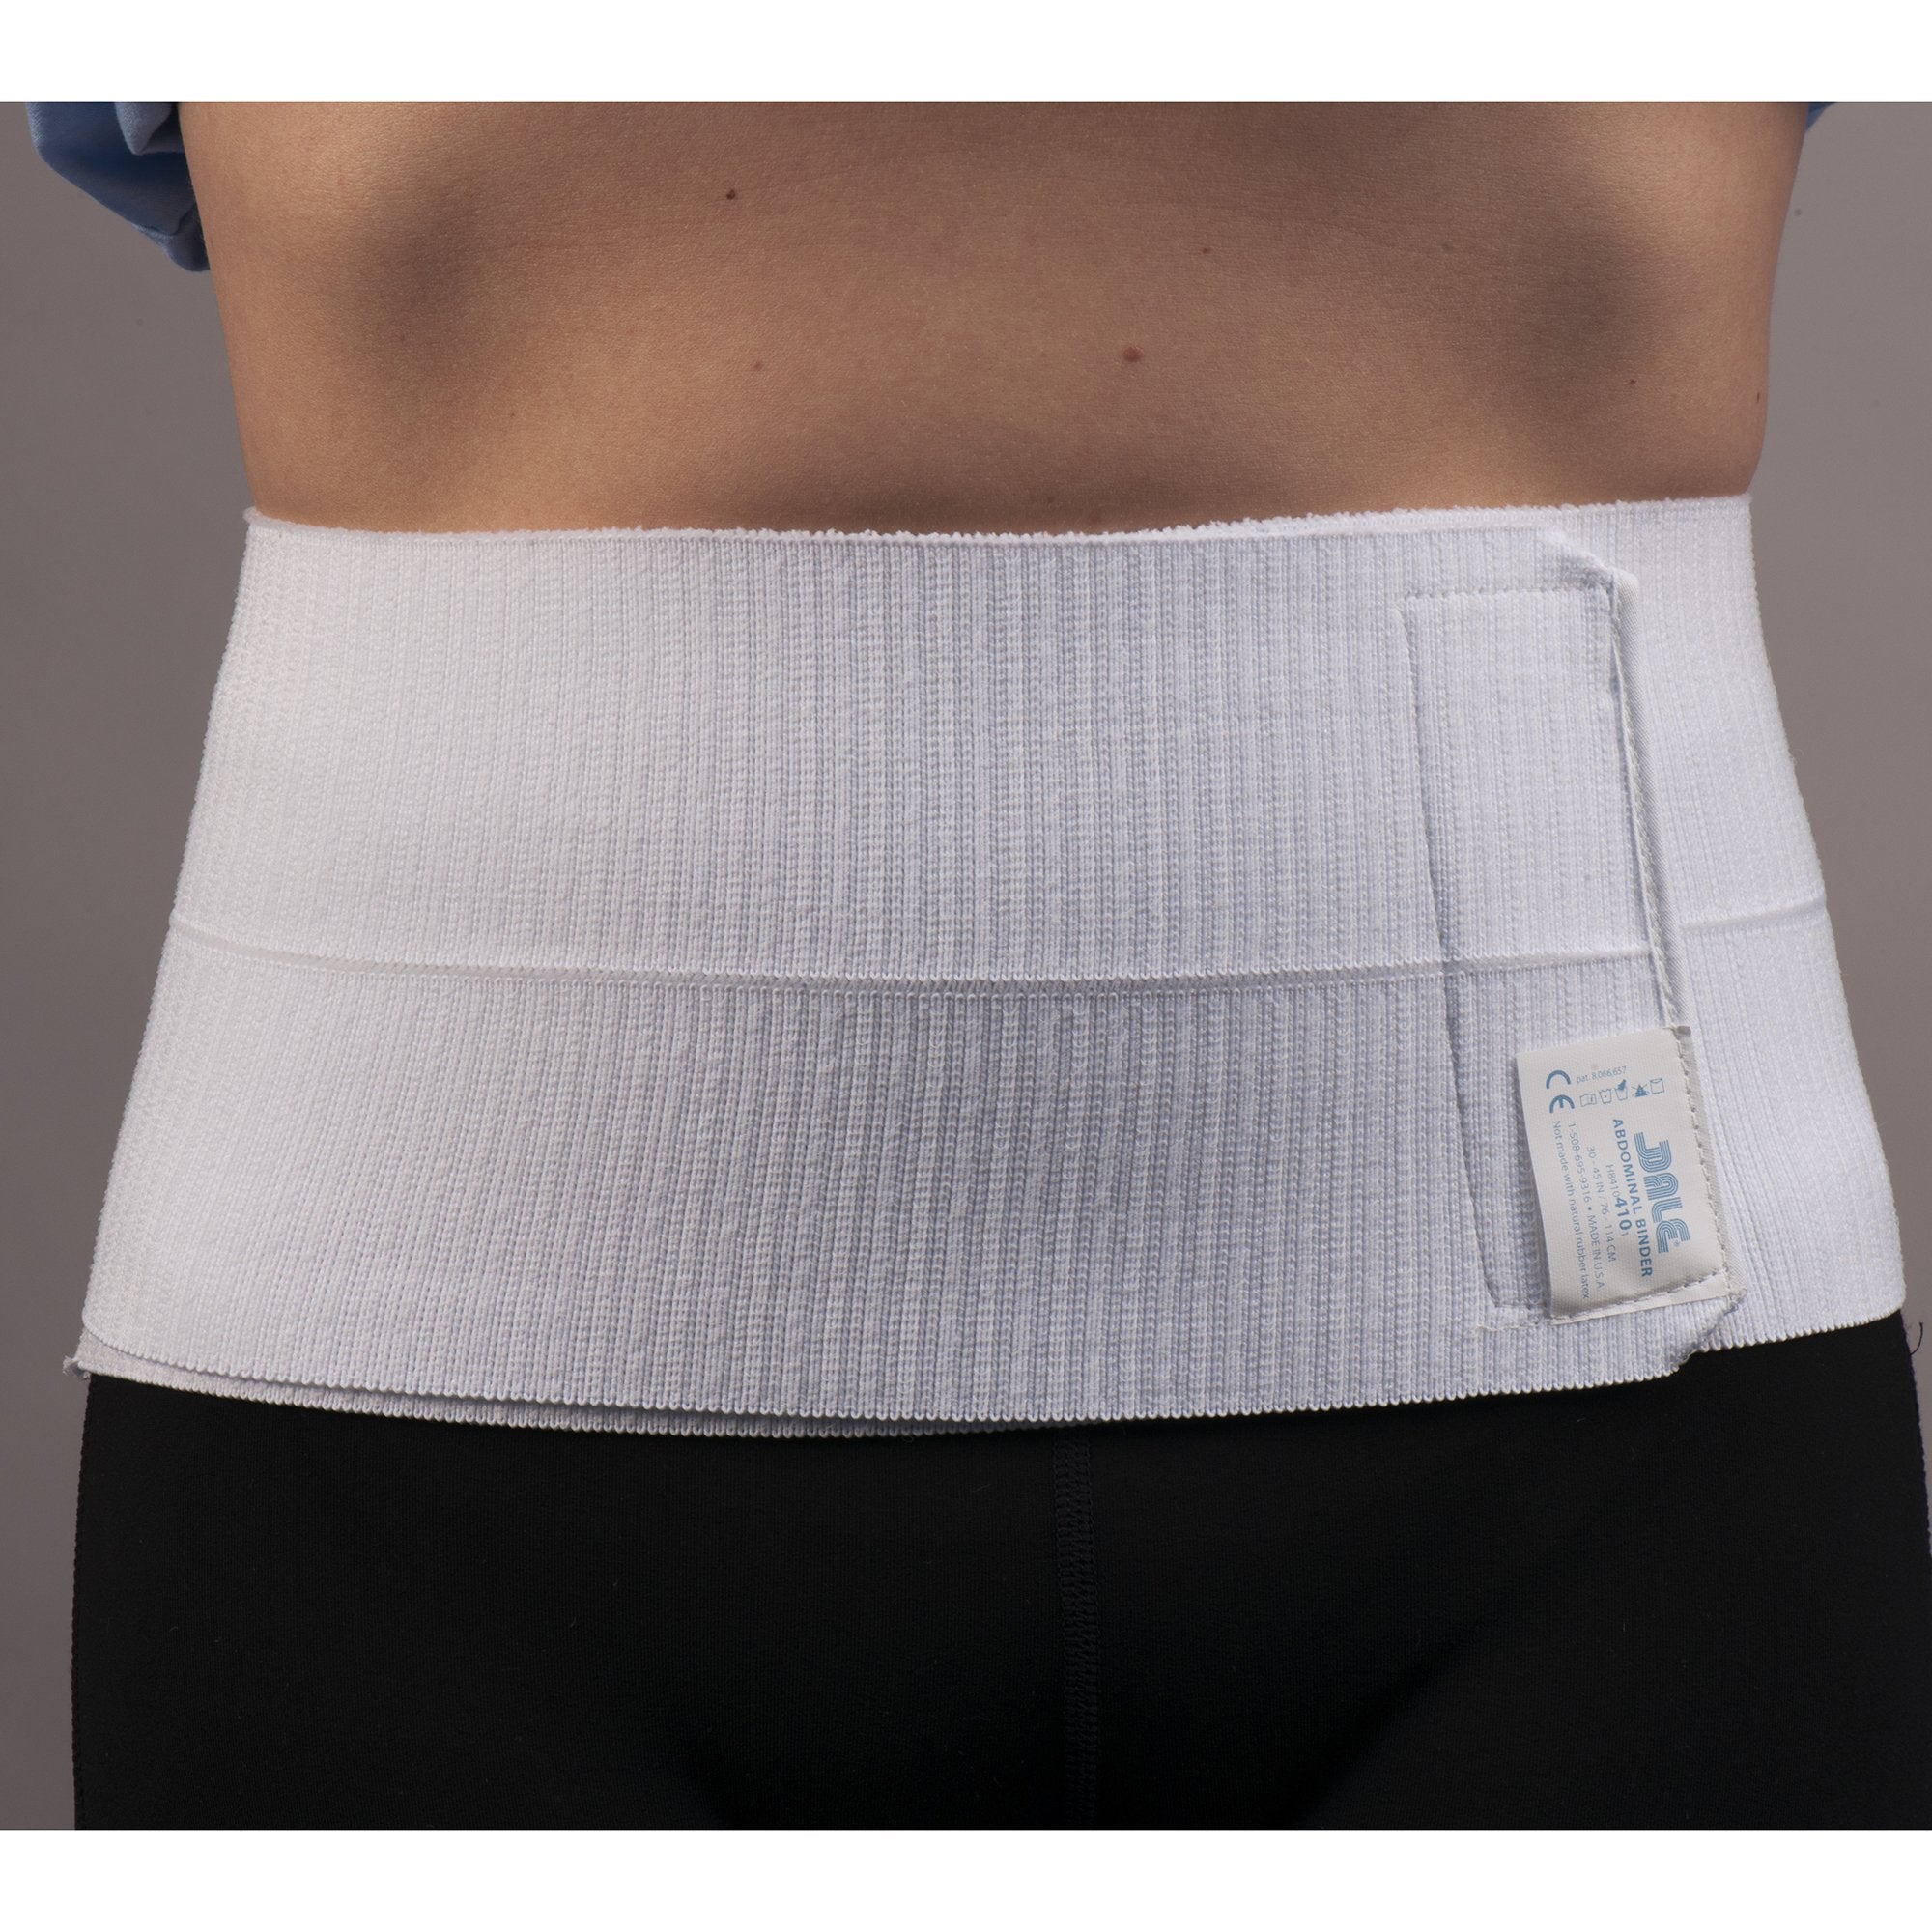 Abdominal Binder Dale® Hook and Loop Closure 28 to 50 Inch Waist Circumference 6 Inch Height Adult